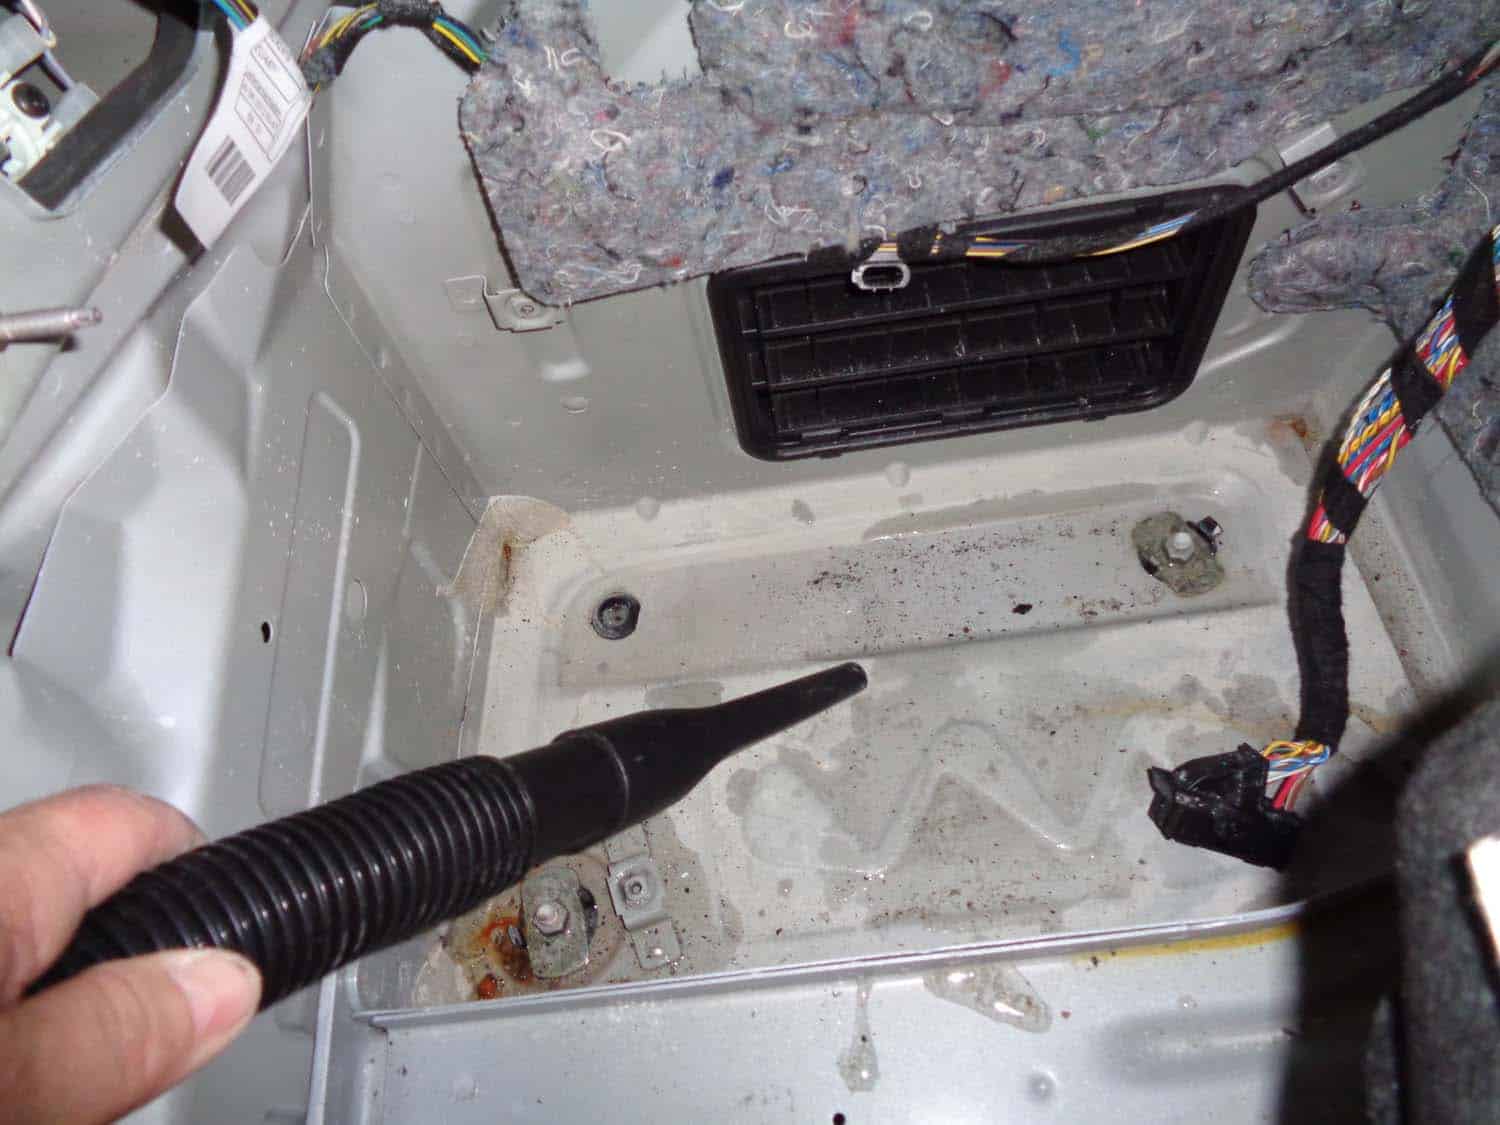 Vacuum out any standing water in the trunk